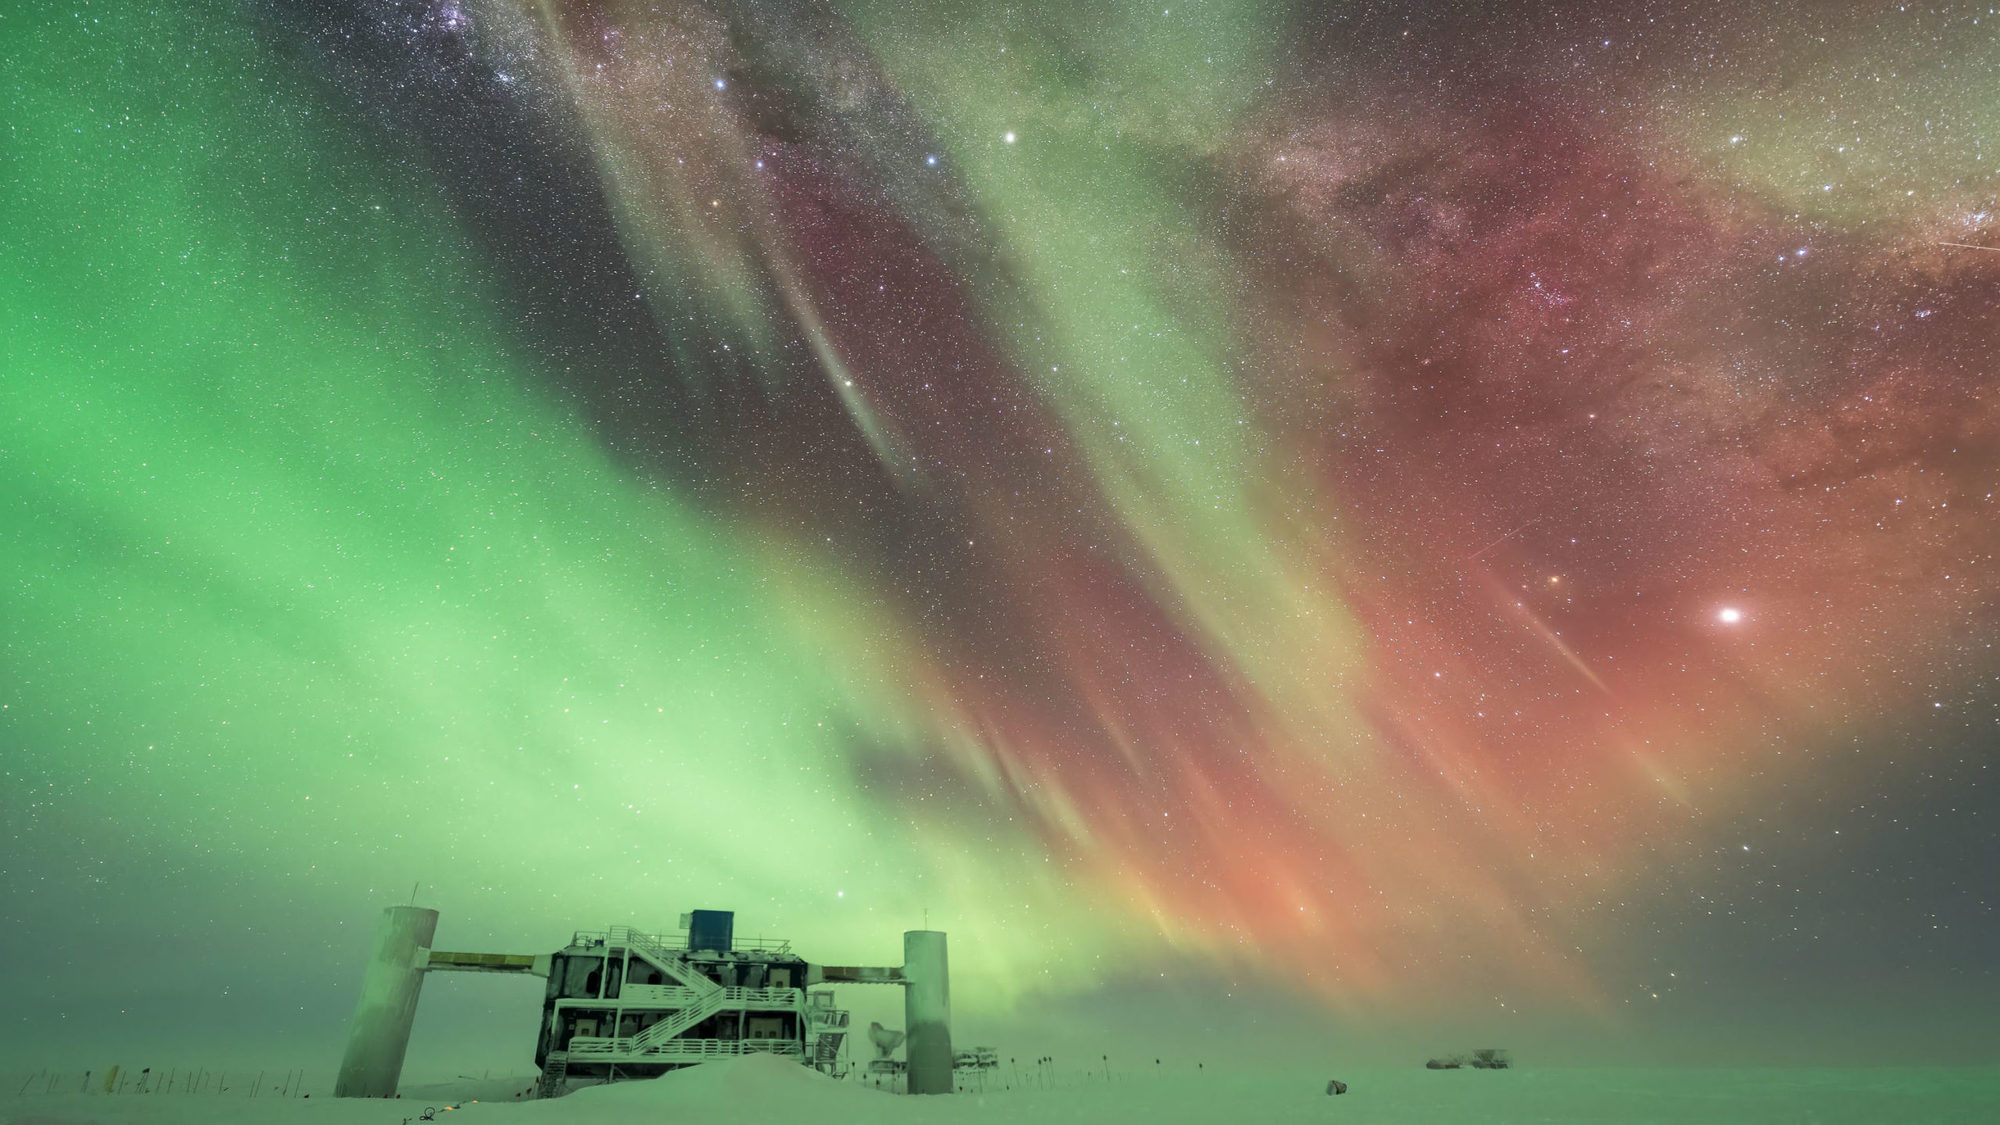 Feast your eyes on these stunning Aurora image from Northern Lights Photographer of the Year 2020